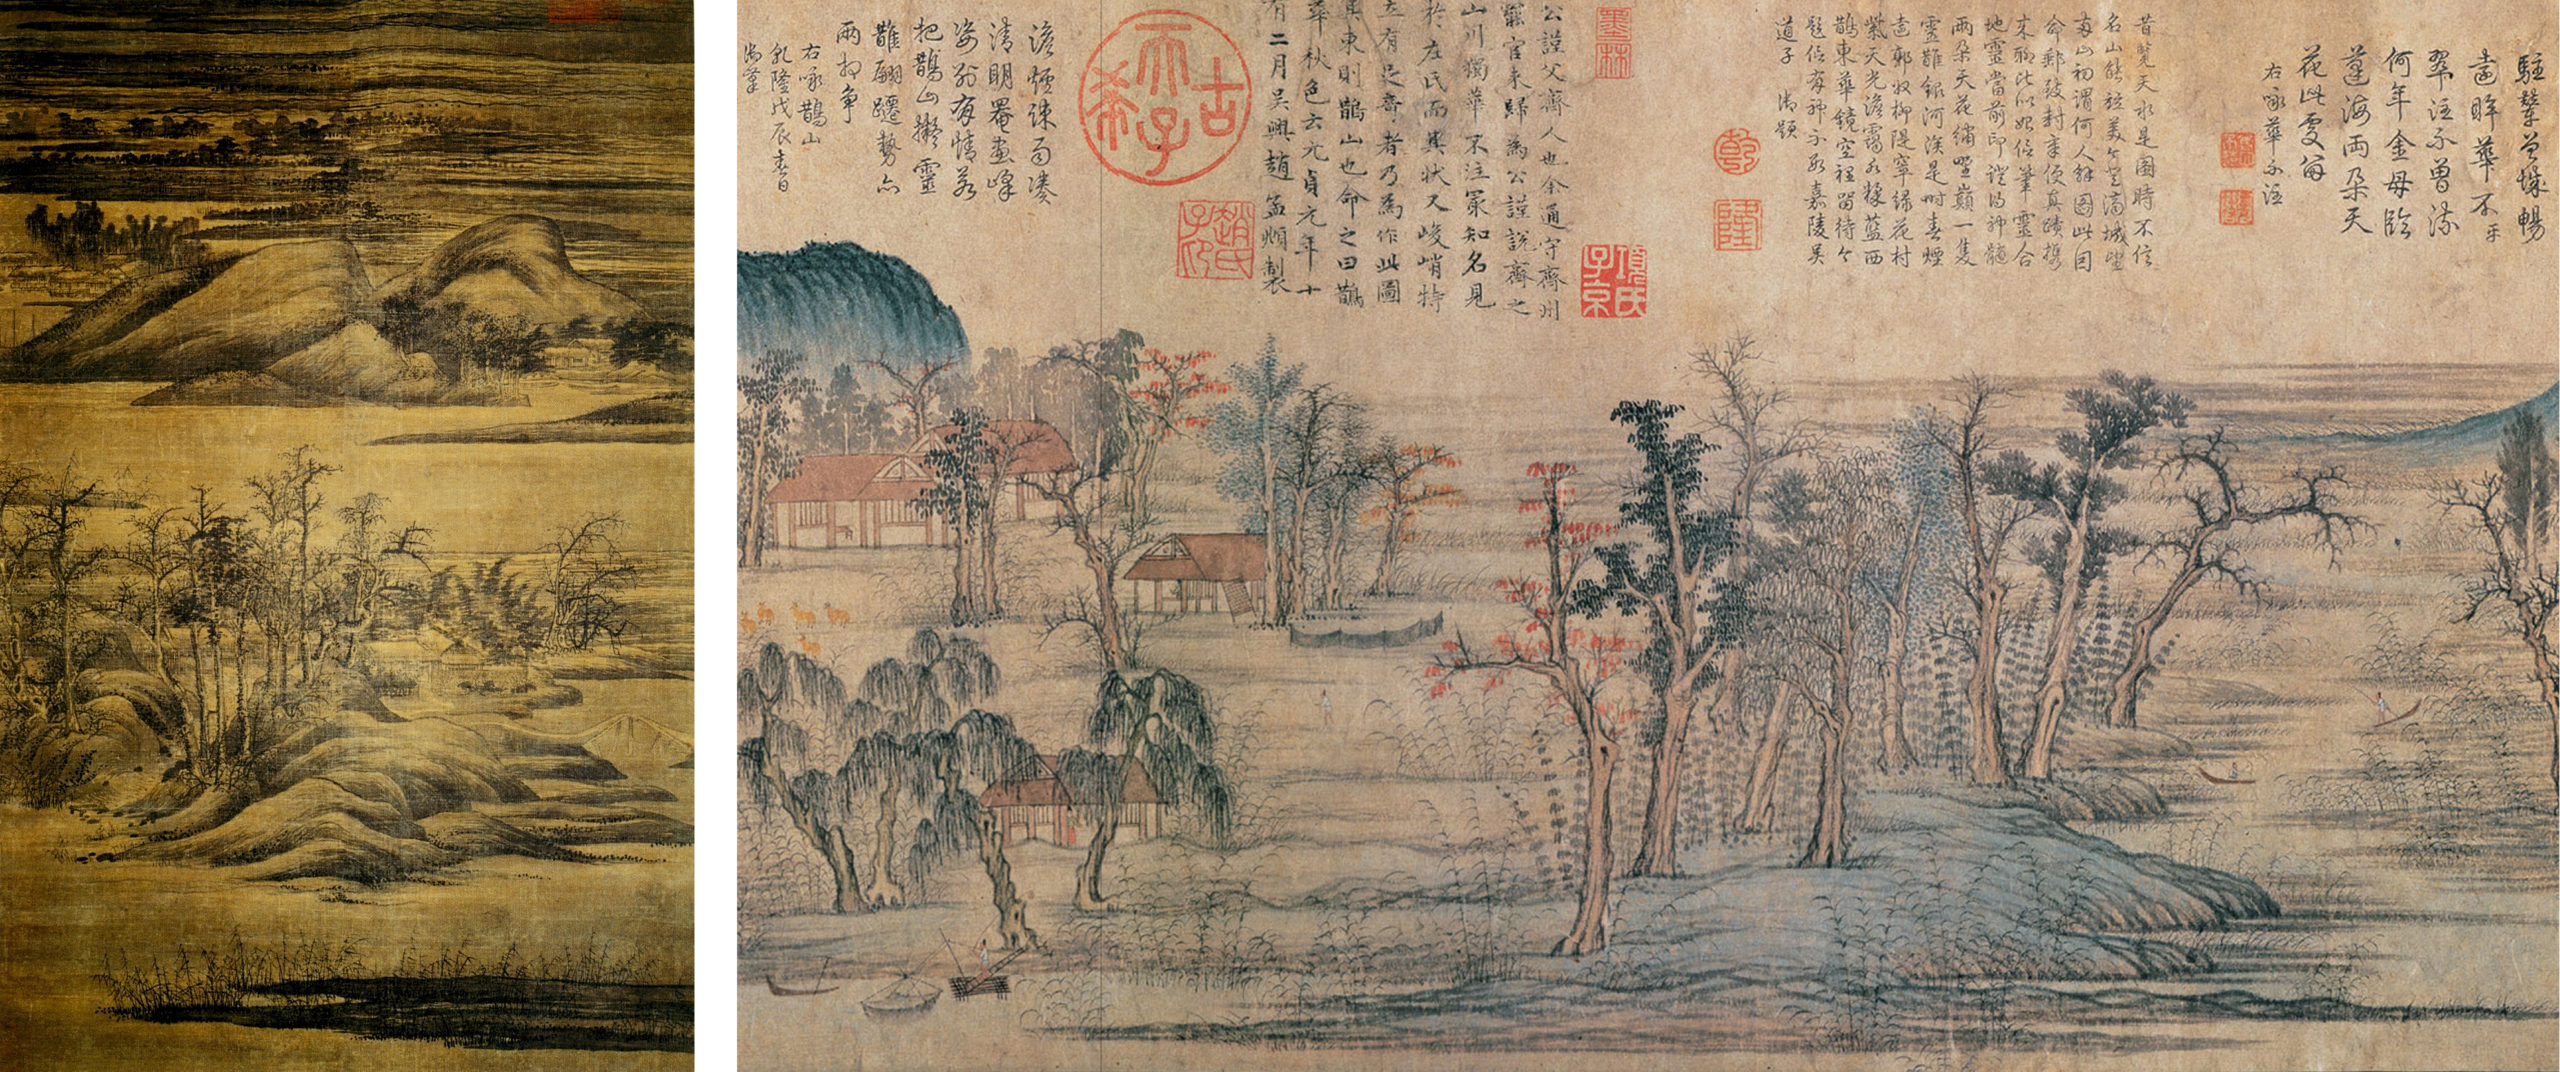 Left: Dong Yuan, Wintry Groves and Layered Banks, c. 950, ink and colors on silk, 181.5 x 116.5 cm (Kurokawa Institute, Japan); Right: Zhao Mengfu, Autumn Colors on the Que and Hua Mountains, detail, 1295, ink and colors on paper, 28.4 x 93.2 cm (National Palace Museum, Taipei)